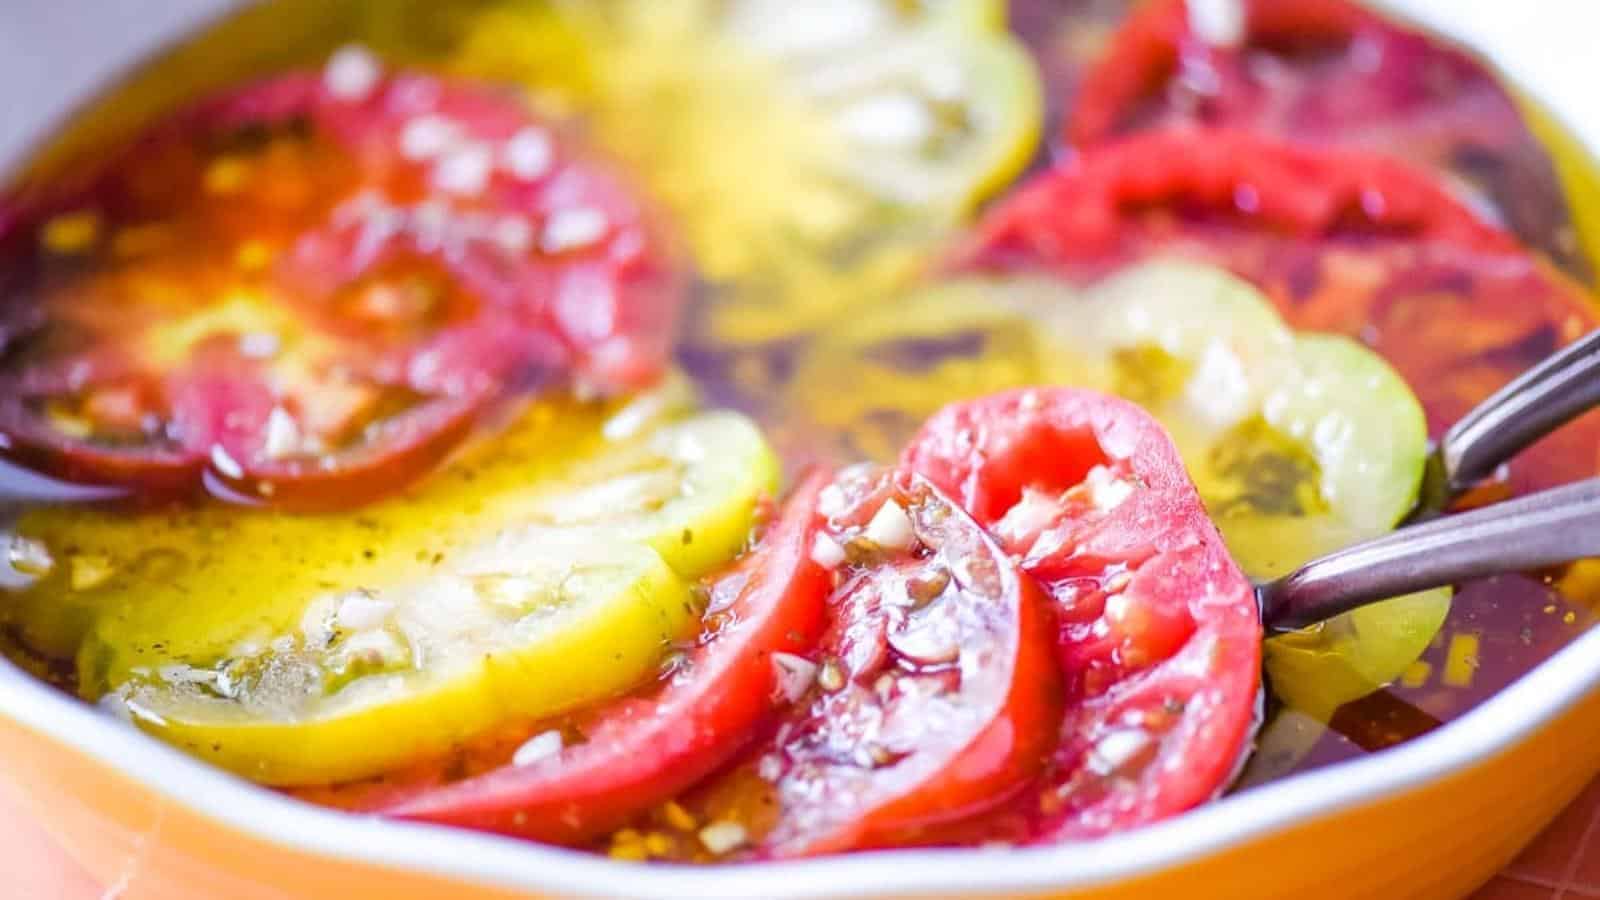 Marinated tomatoes in a dish.